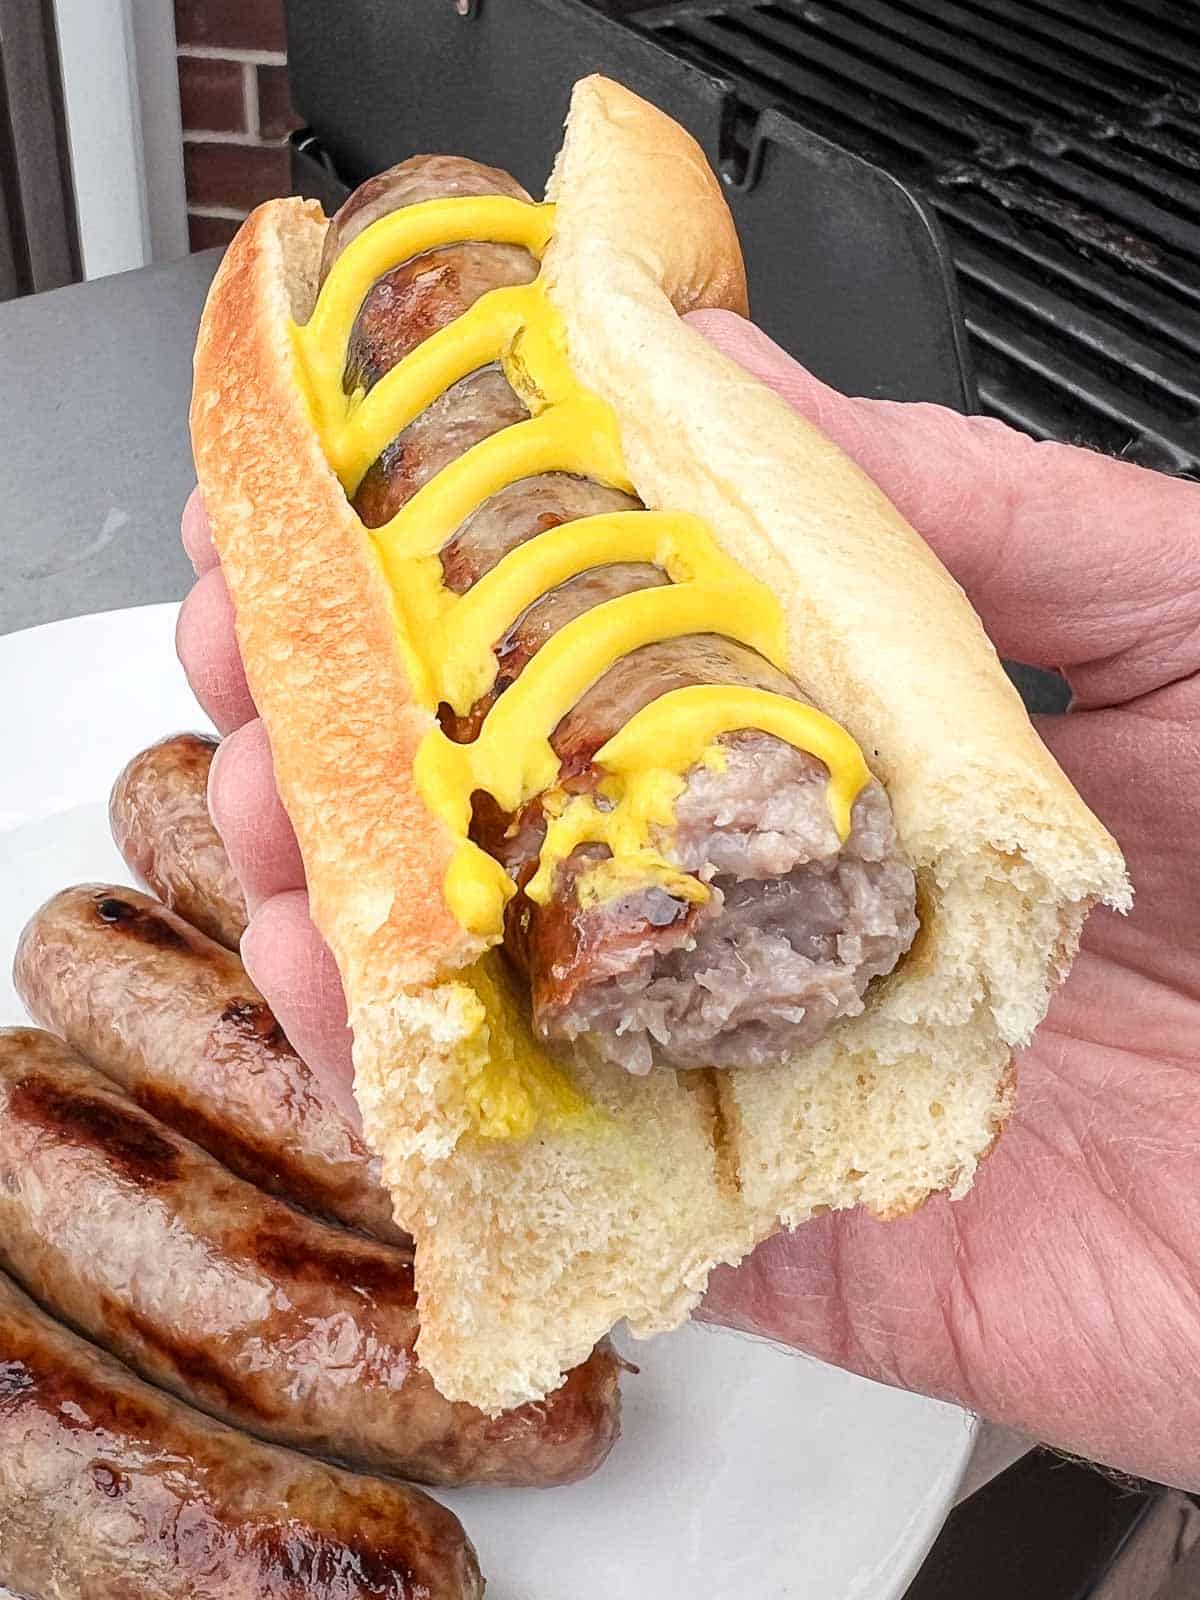 A grilled beer brat with yellow mustard in a bun being held up to the camera.